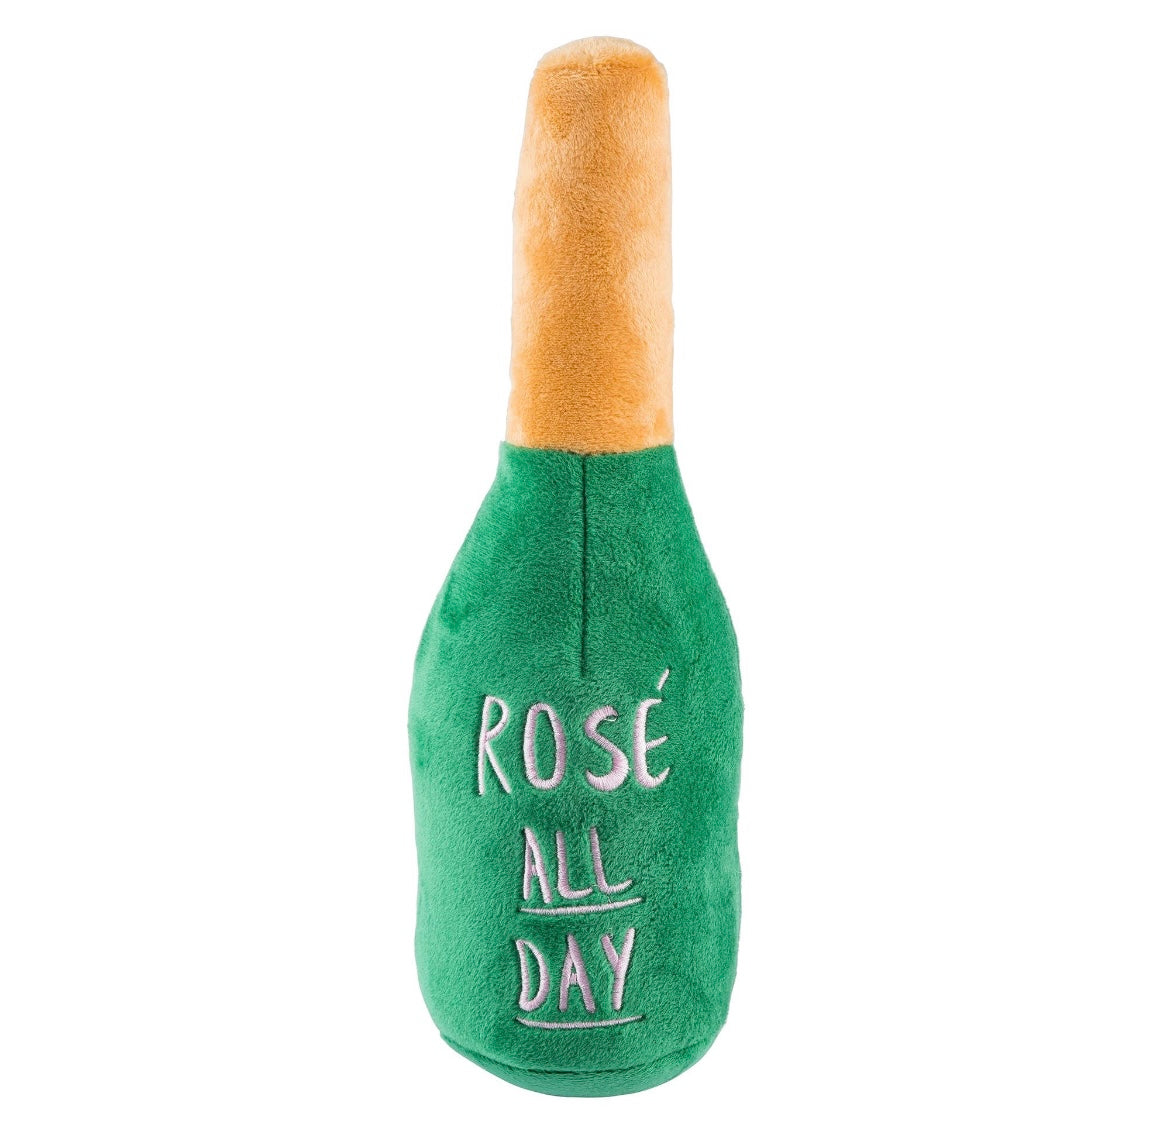 Woof Clicquot Champagne Bottle Dog Toy